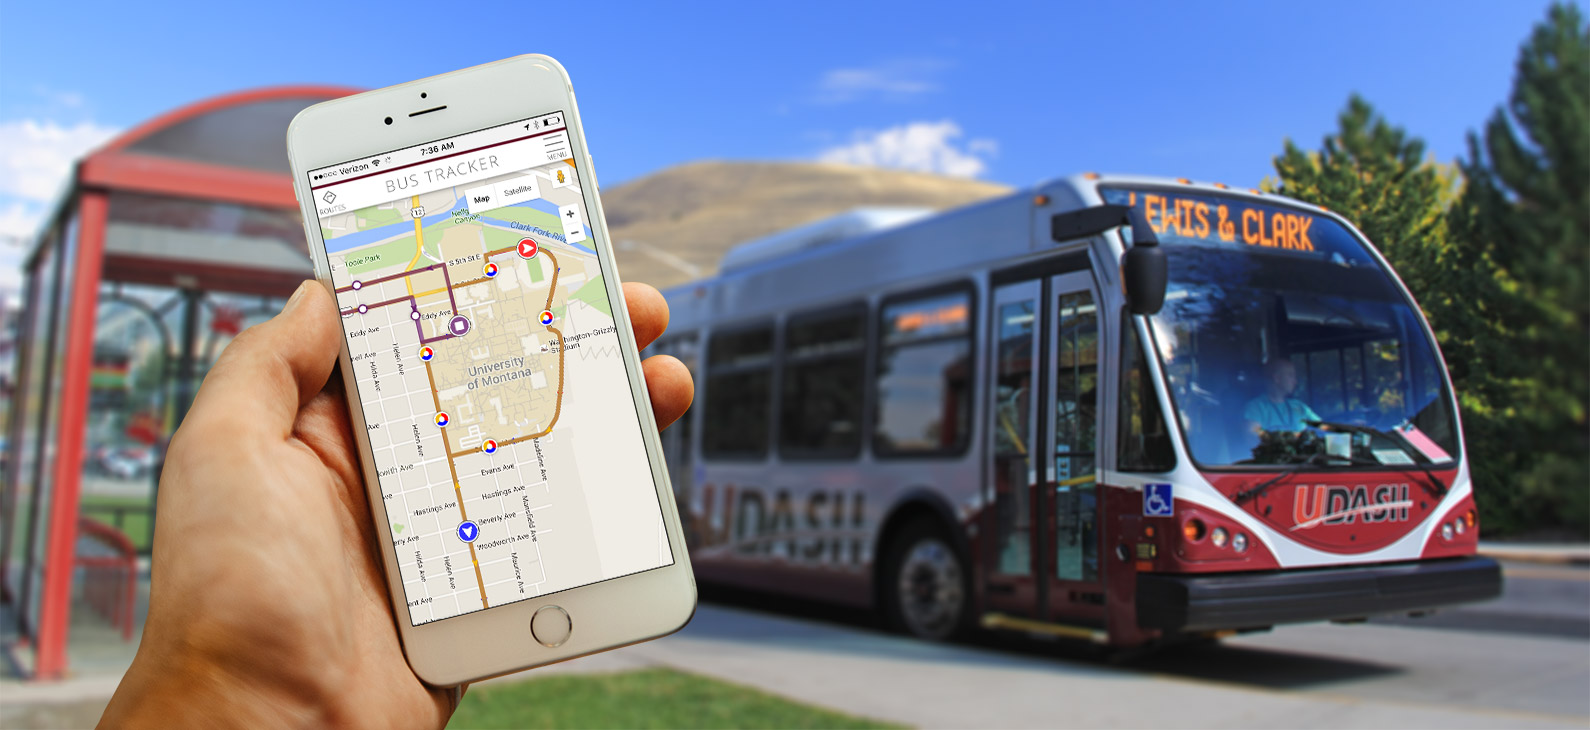 UDash bus with bus schedule on smart phone